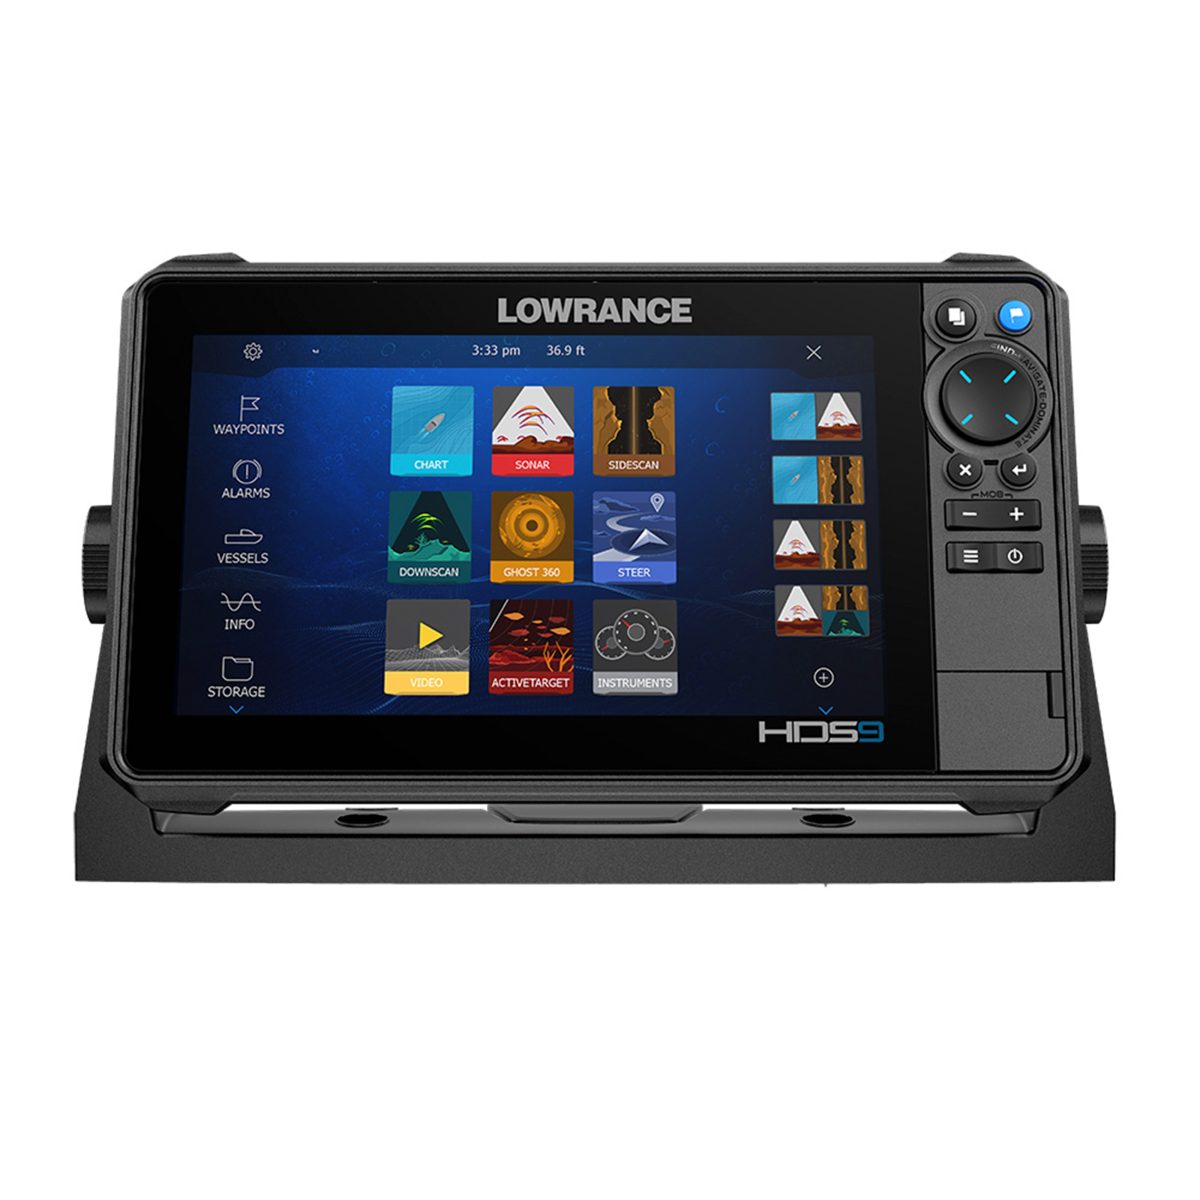 Lowrance HDS PRO 9 Fishfinder Chartplotter with C-MAP Discover OnBoard, No Transducer in White